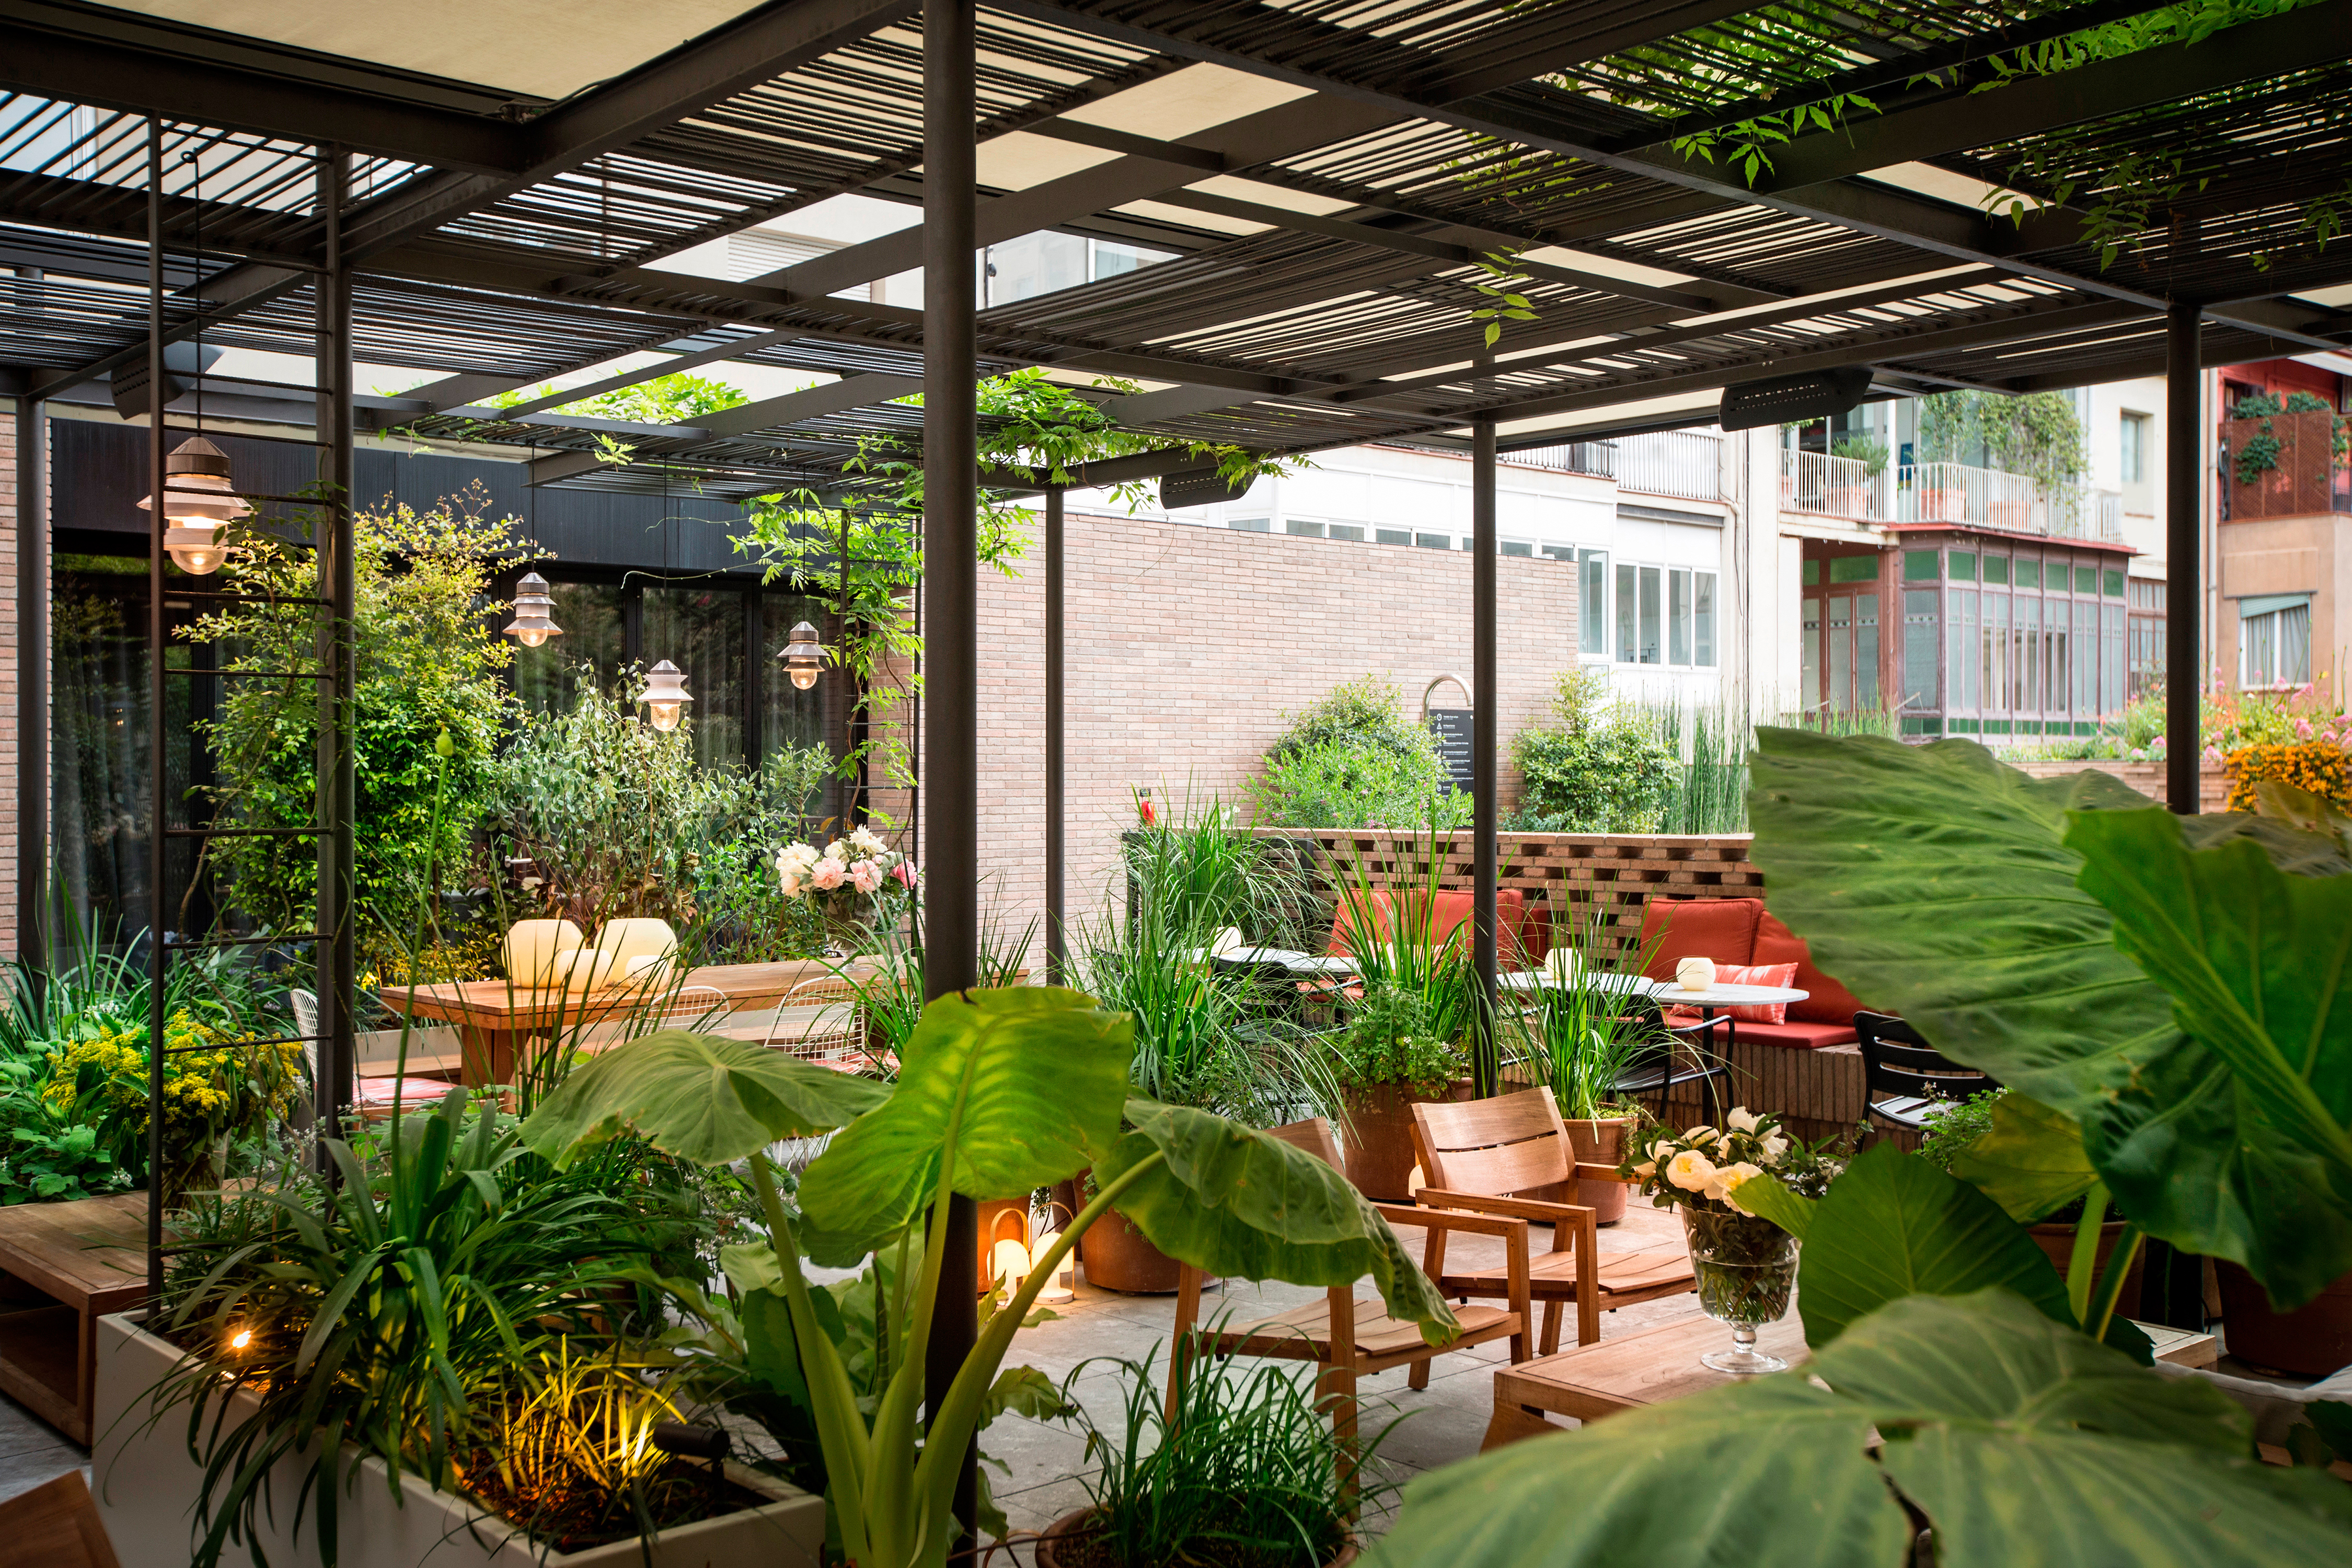 Outdoor Patio with Seating and Plants